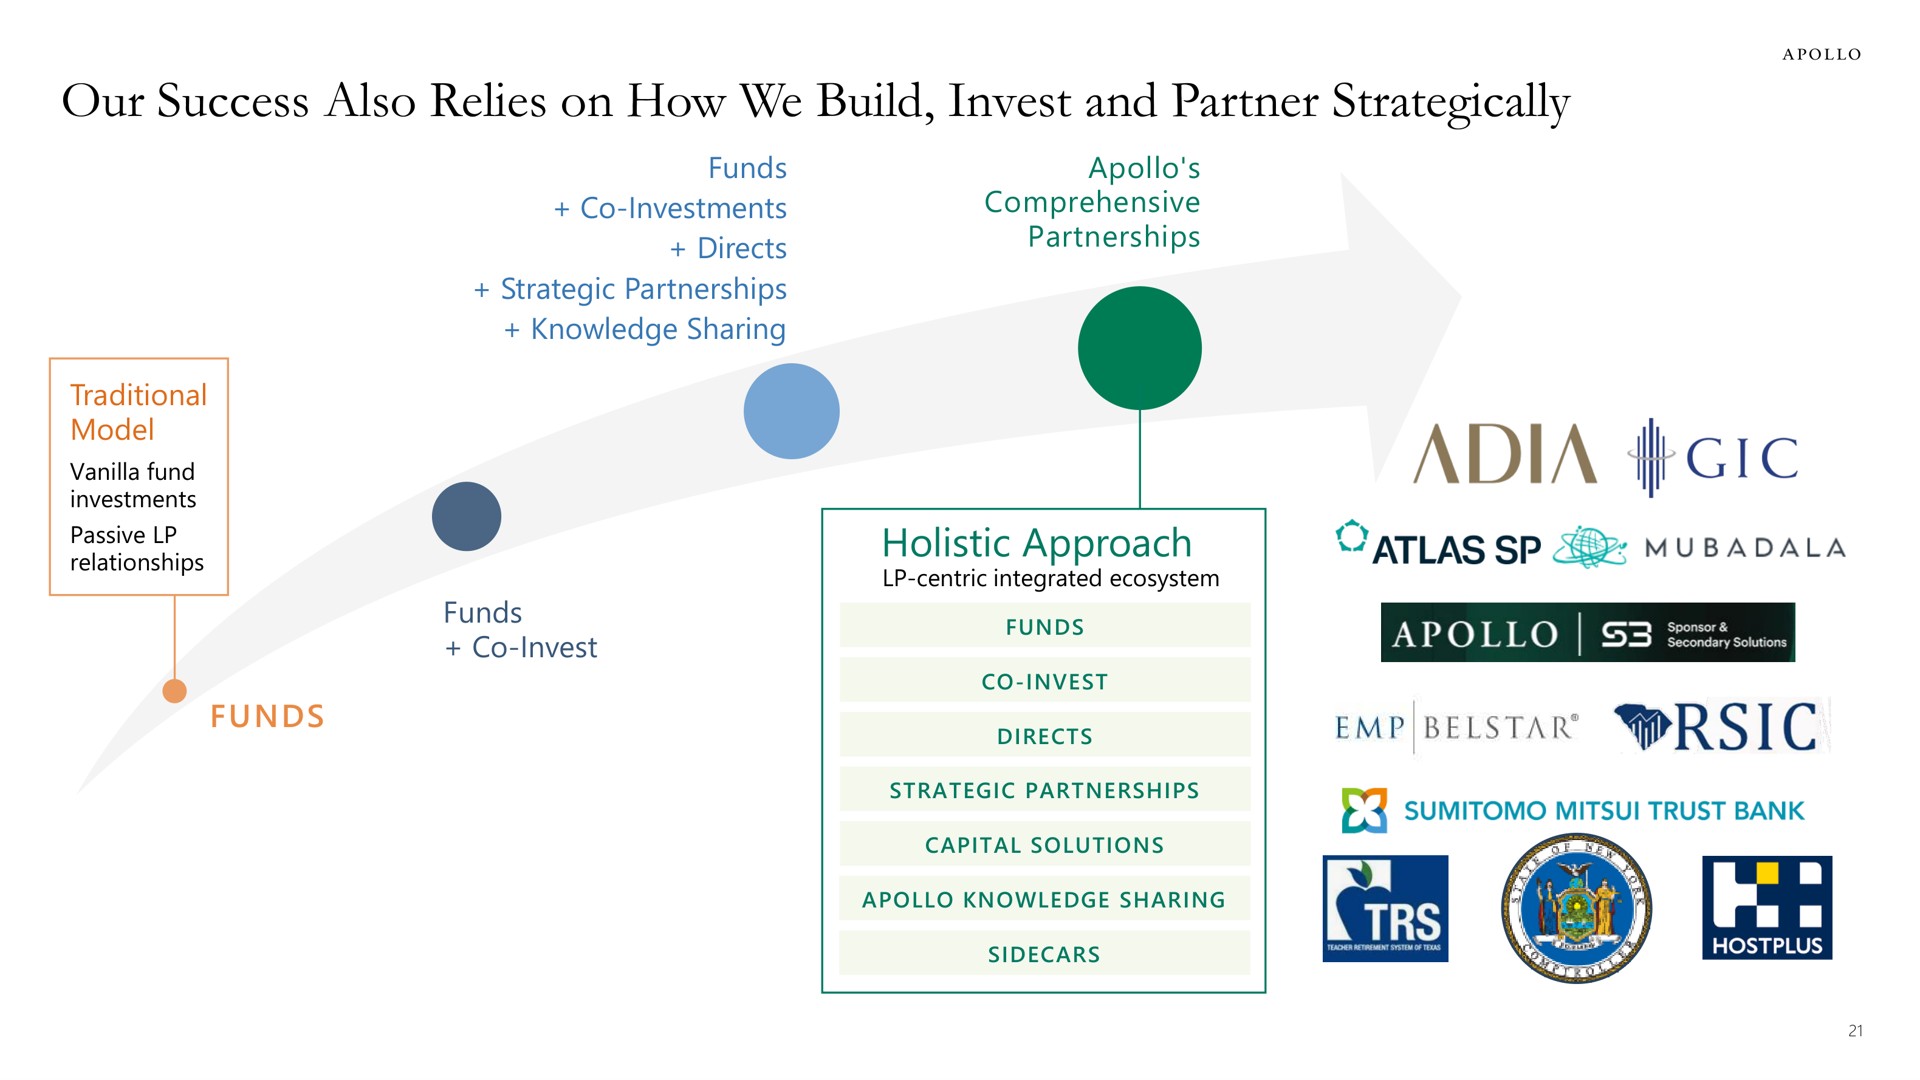 our success also relies on how we build invest and partner strategically atlas directs | Apollo Global Management